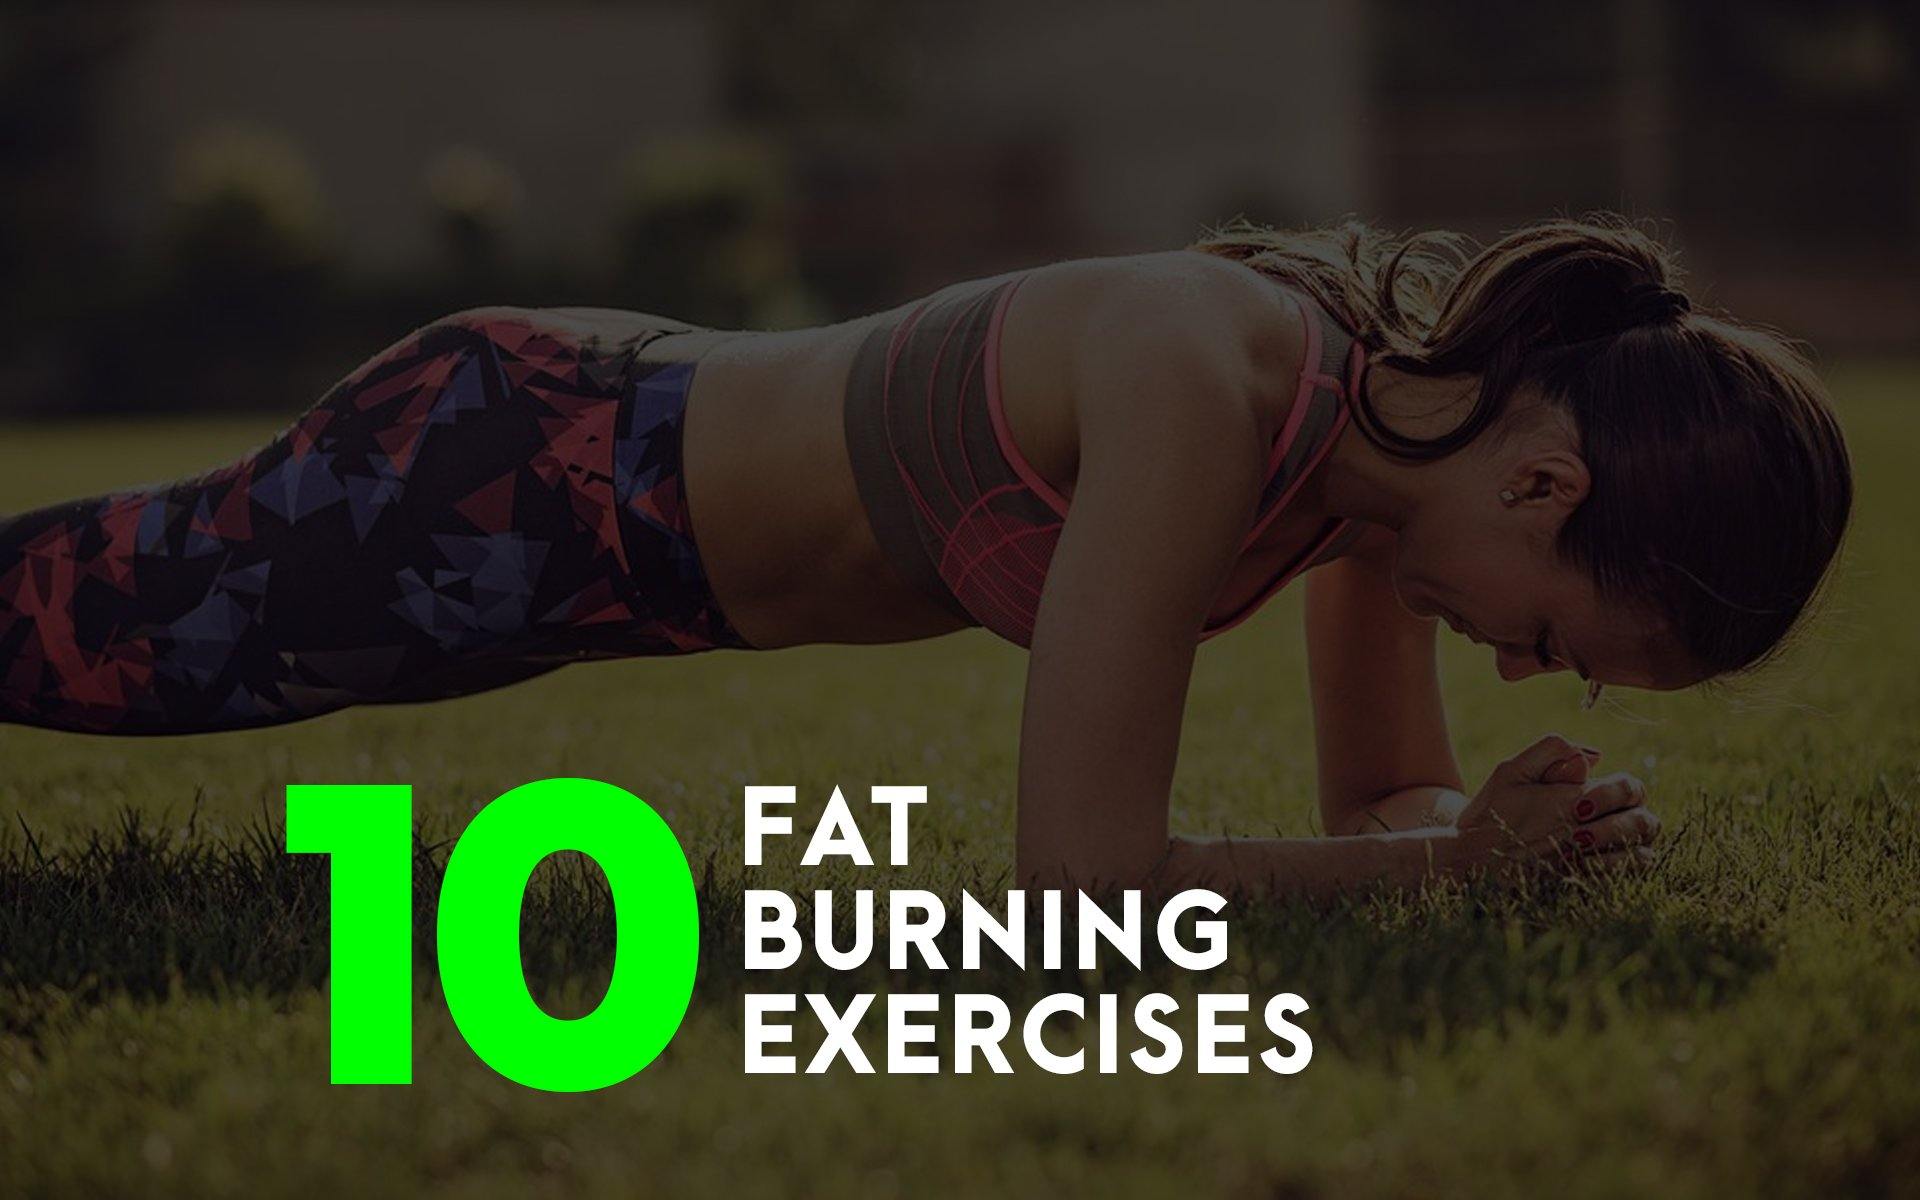 10 Fat Burning Exercises to Lose Weight and Stay Fit and Active - Spike